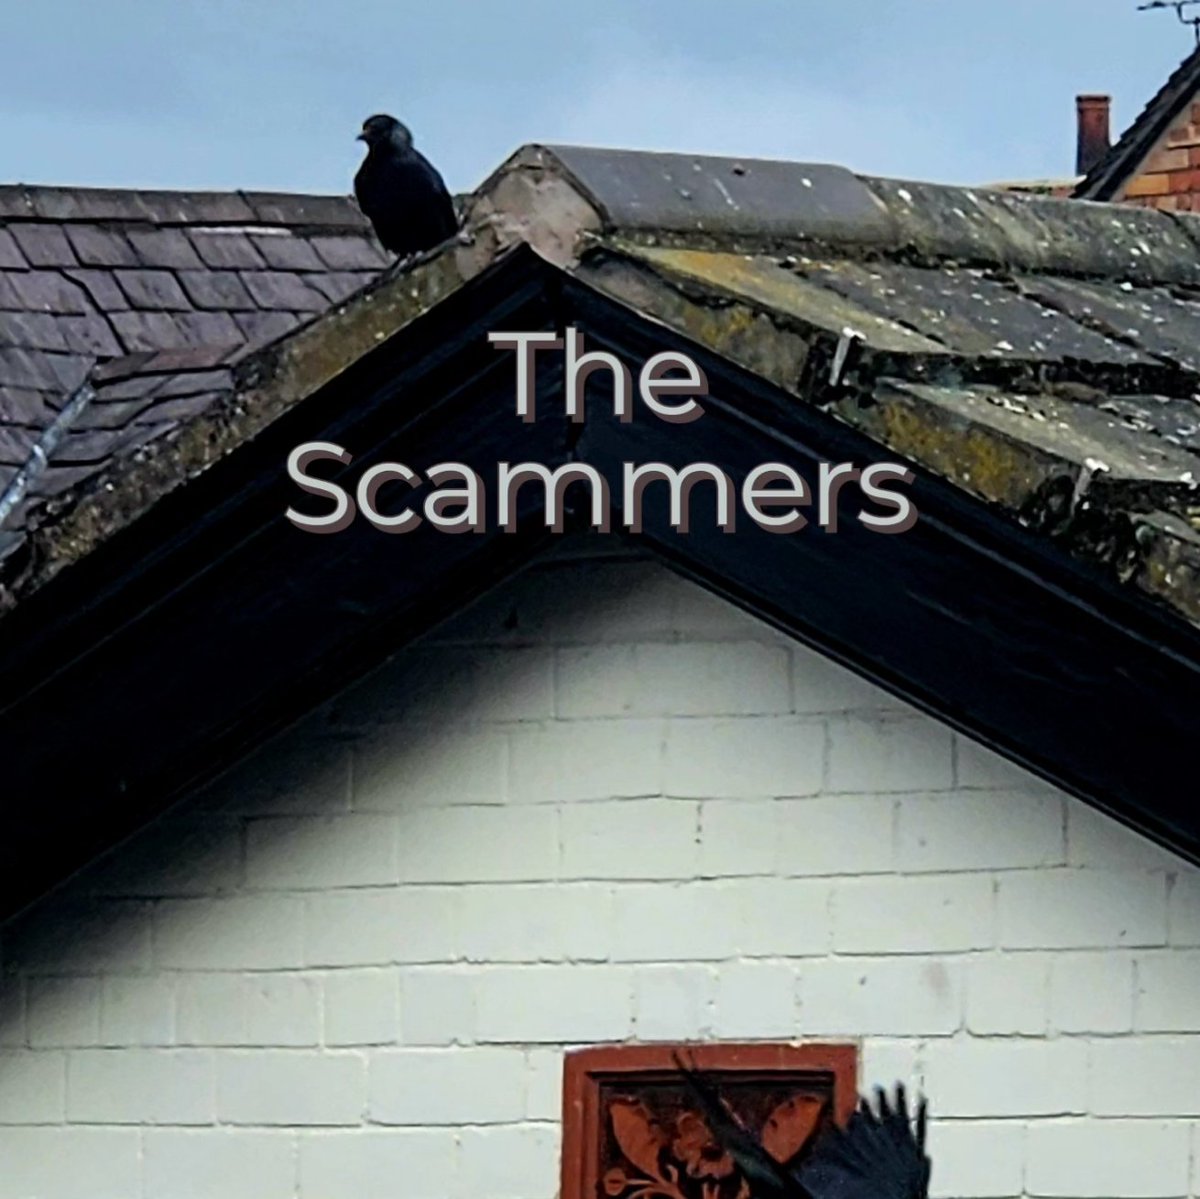 BREAKING NEWS on the other side of the street, we have a local house eviction. The home has been happy occupied by a lovely family for the past few years. This year, two scammers have scammed the owners out of their home

#mold #flintshire #northwales #northwalessocial